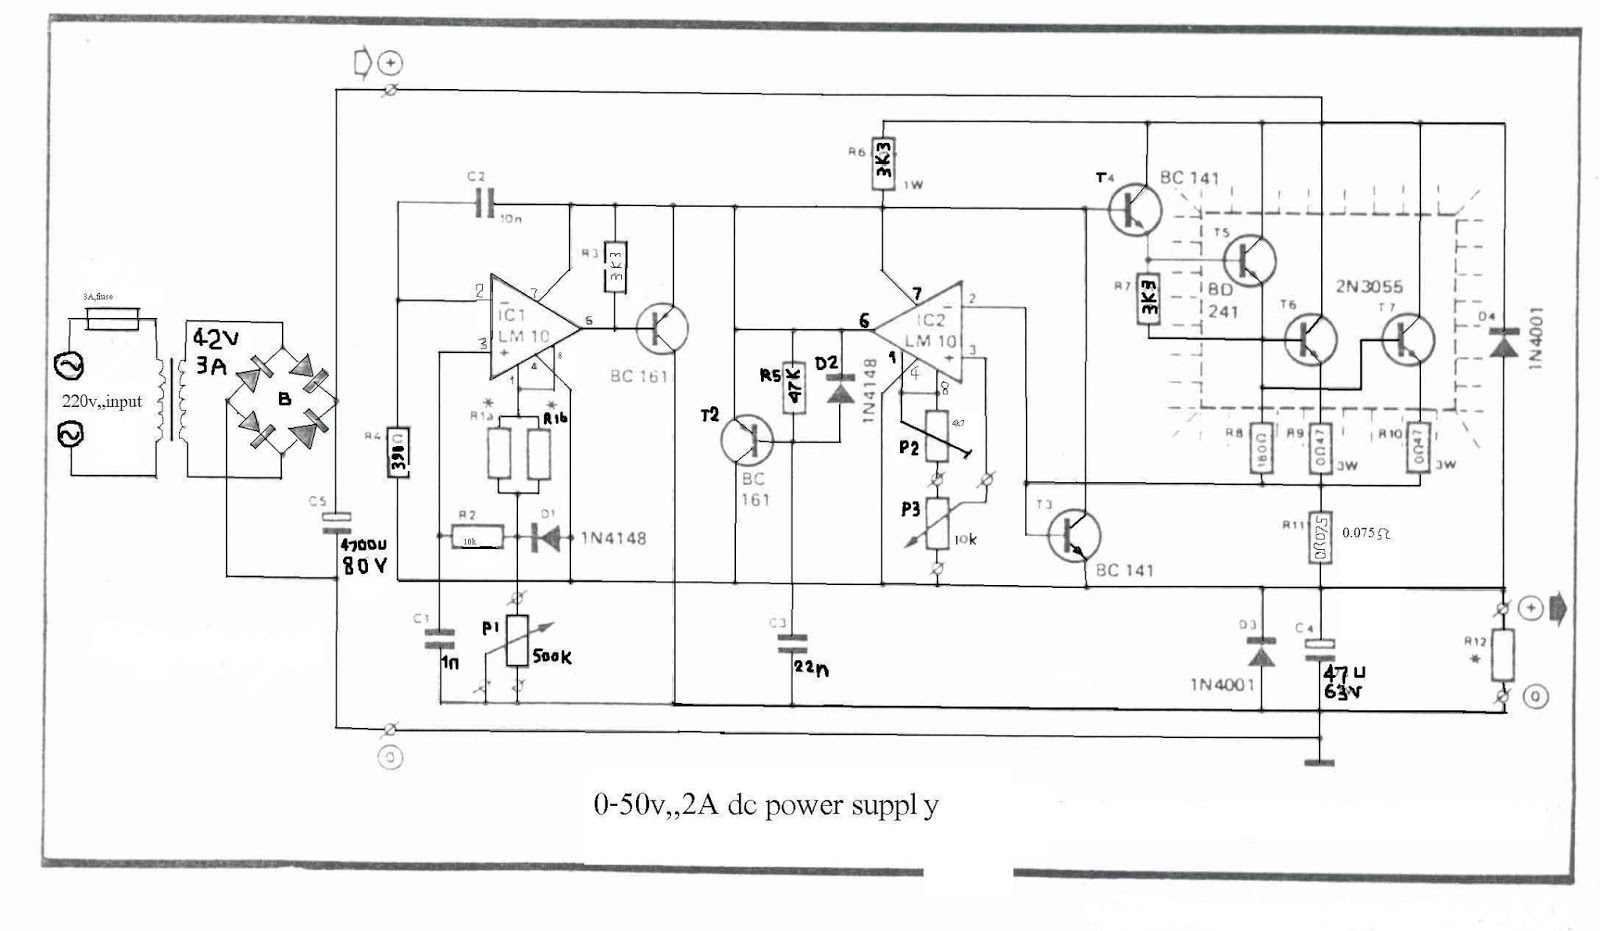 Simple 0-50V 2A Bench Power Supply Circuit Diagram  